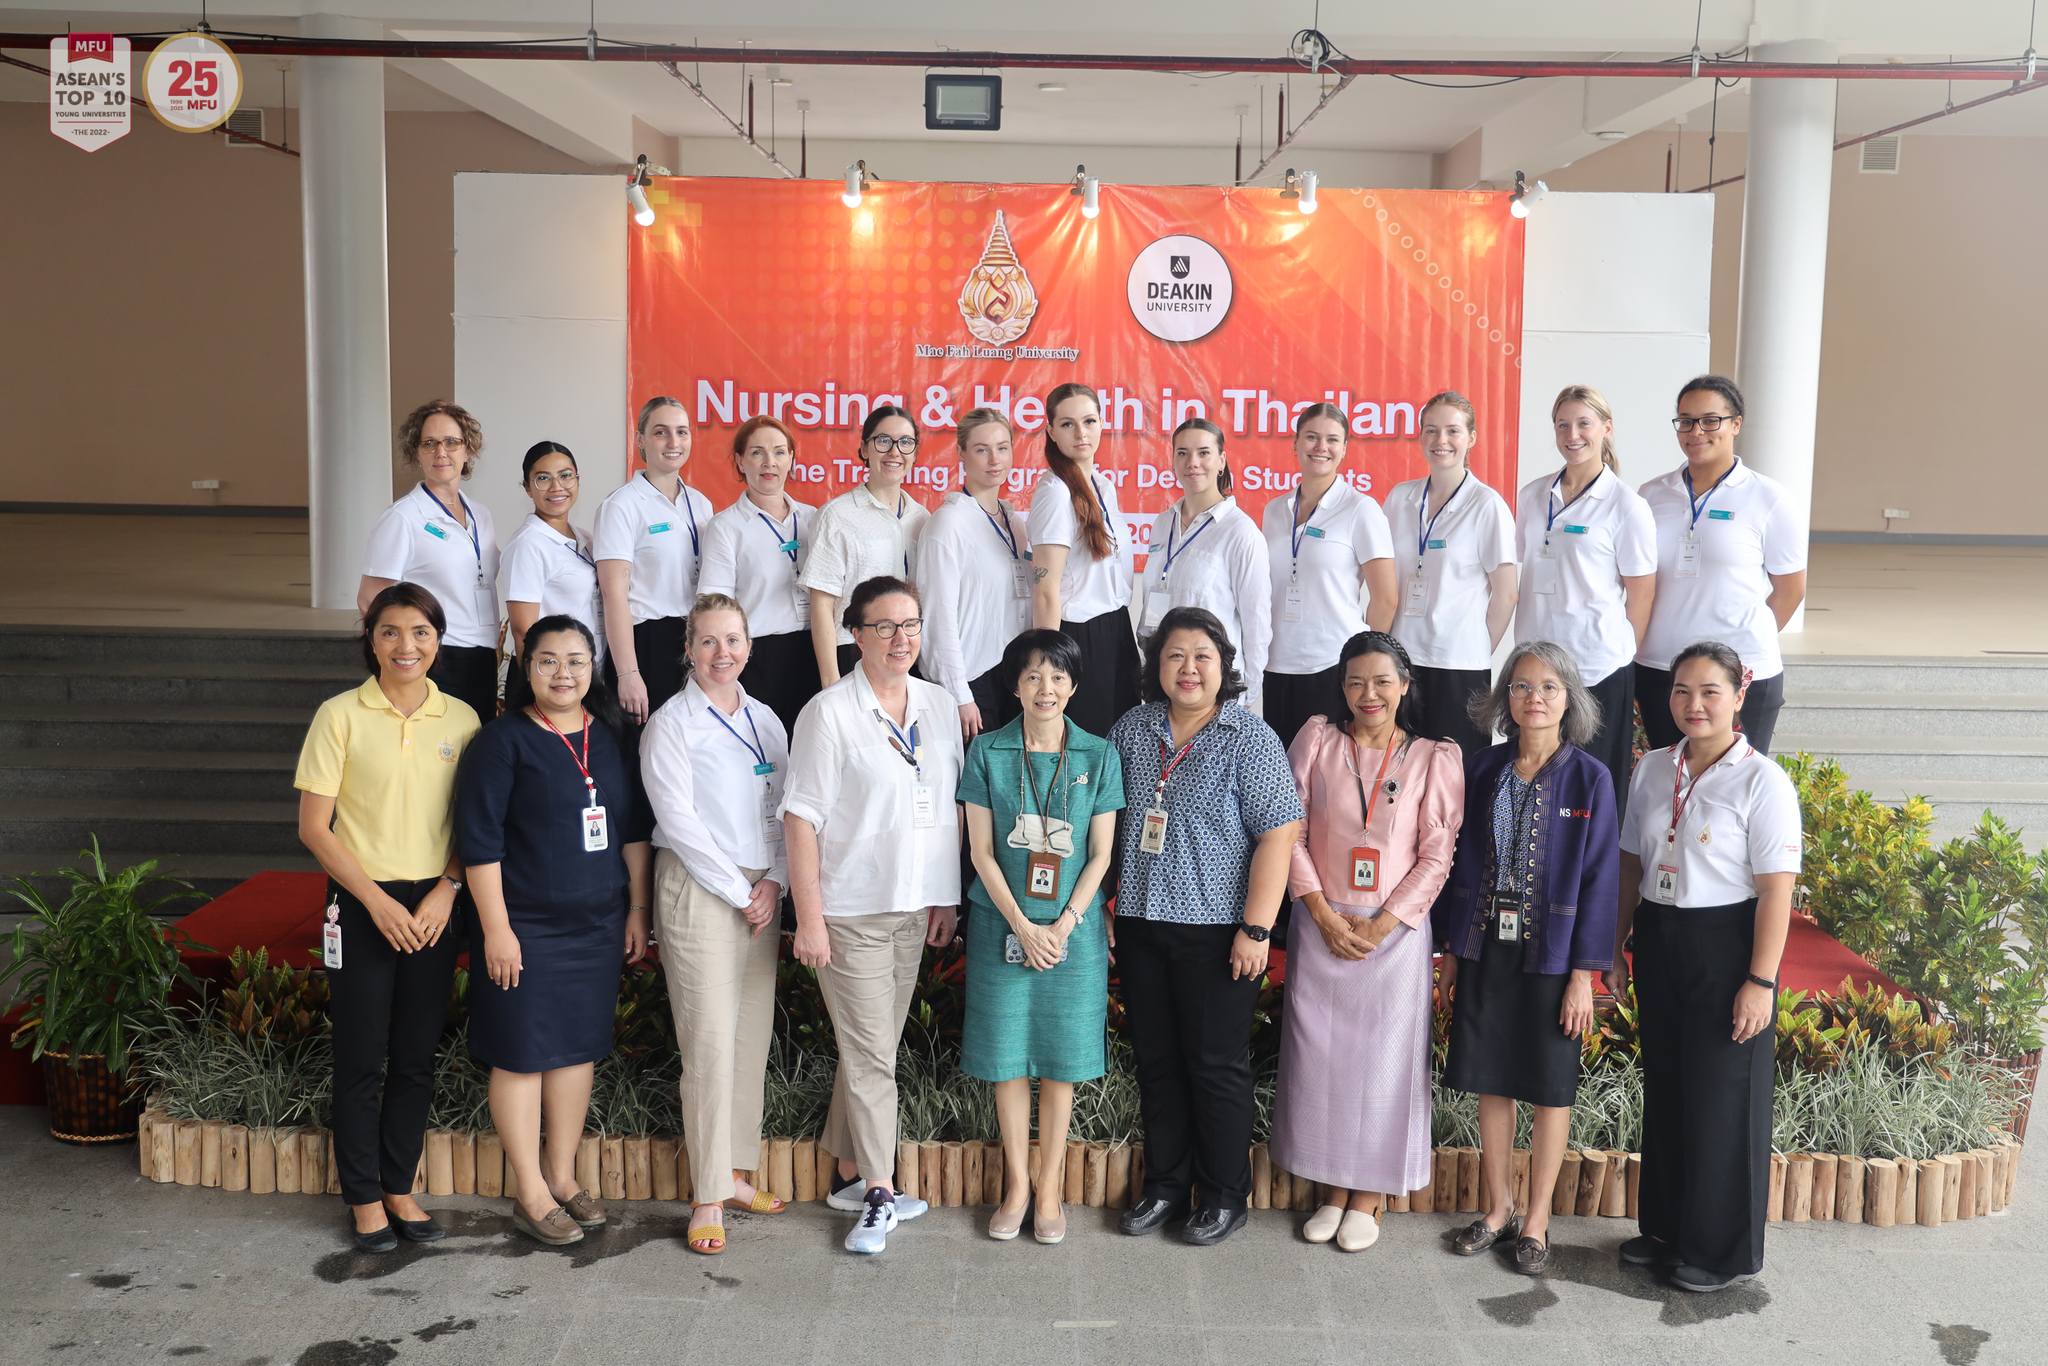 The School of Nursing, Mae Fah Luang University, welcomed professors and nursing students from the School of Nursing and Midwifery, Deakin University, Australia, on their Thailand Cultural Study Tour Program “Nursing and Health in Thailand.” 